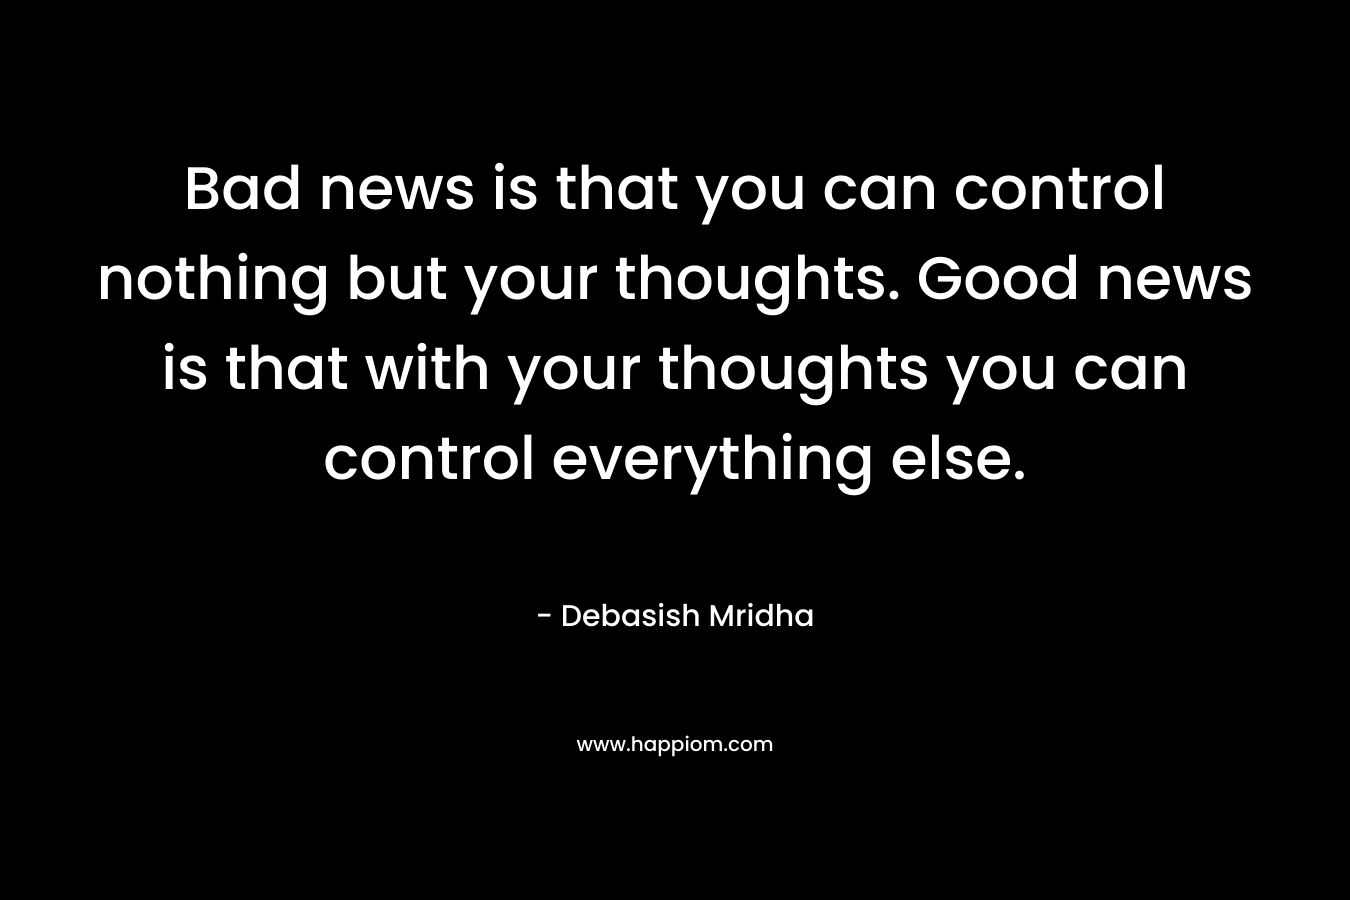 Bad news is that you can control nothing but your thoughts. Good news is that with your thoughts you can control everything else. – Debasish Mridha